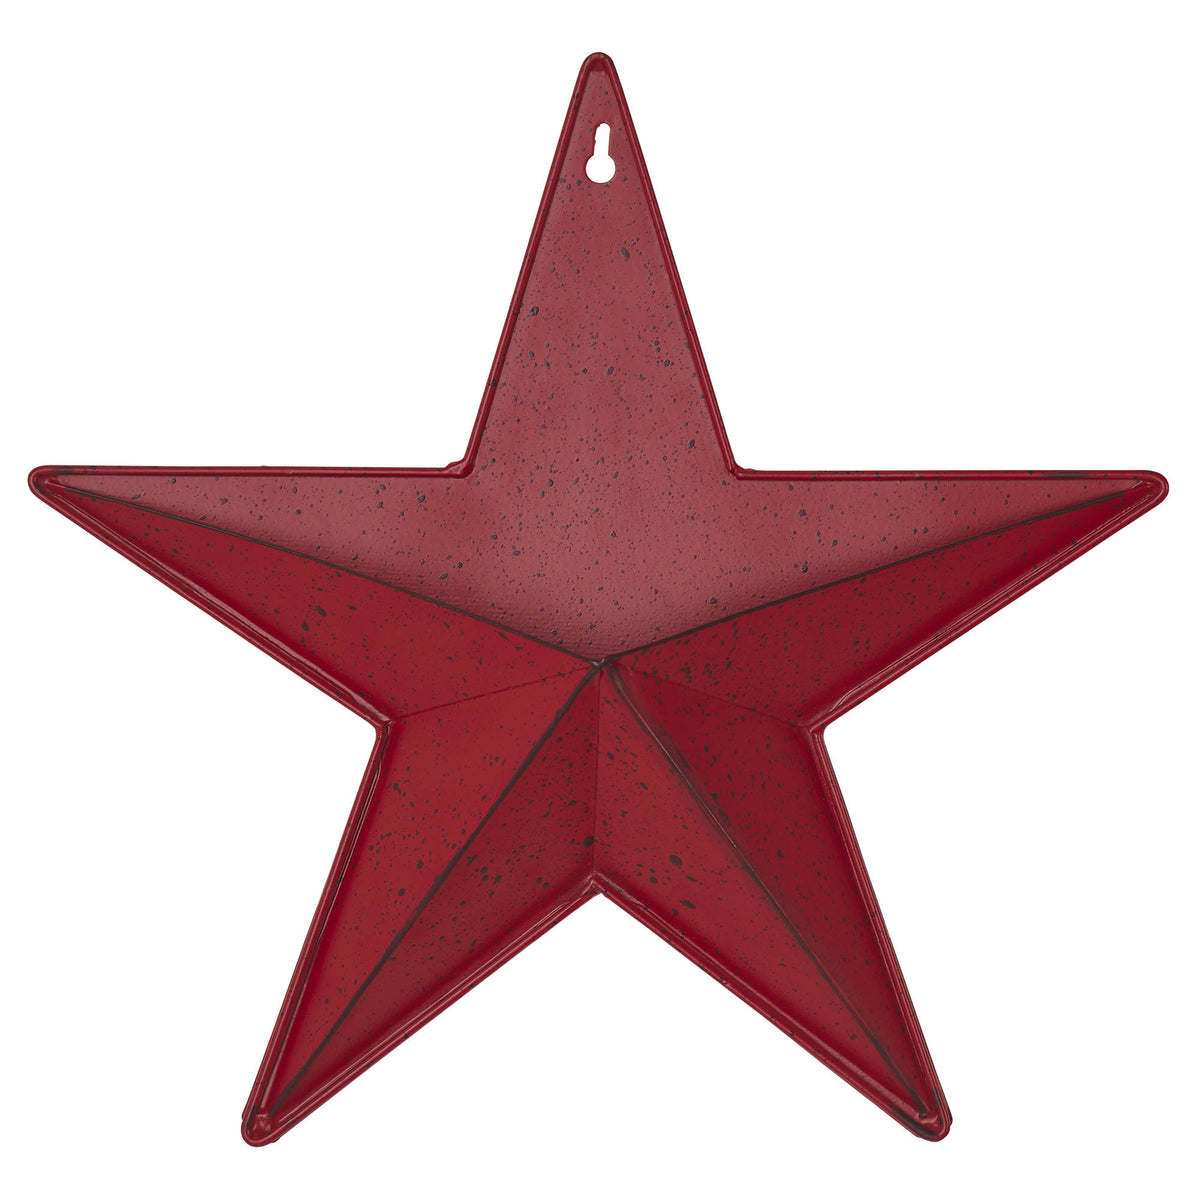 Faceted Metal Star Burgundy Wall Hanging w/ Pocket 12x12